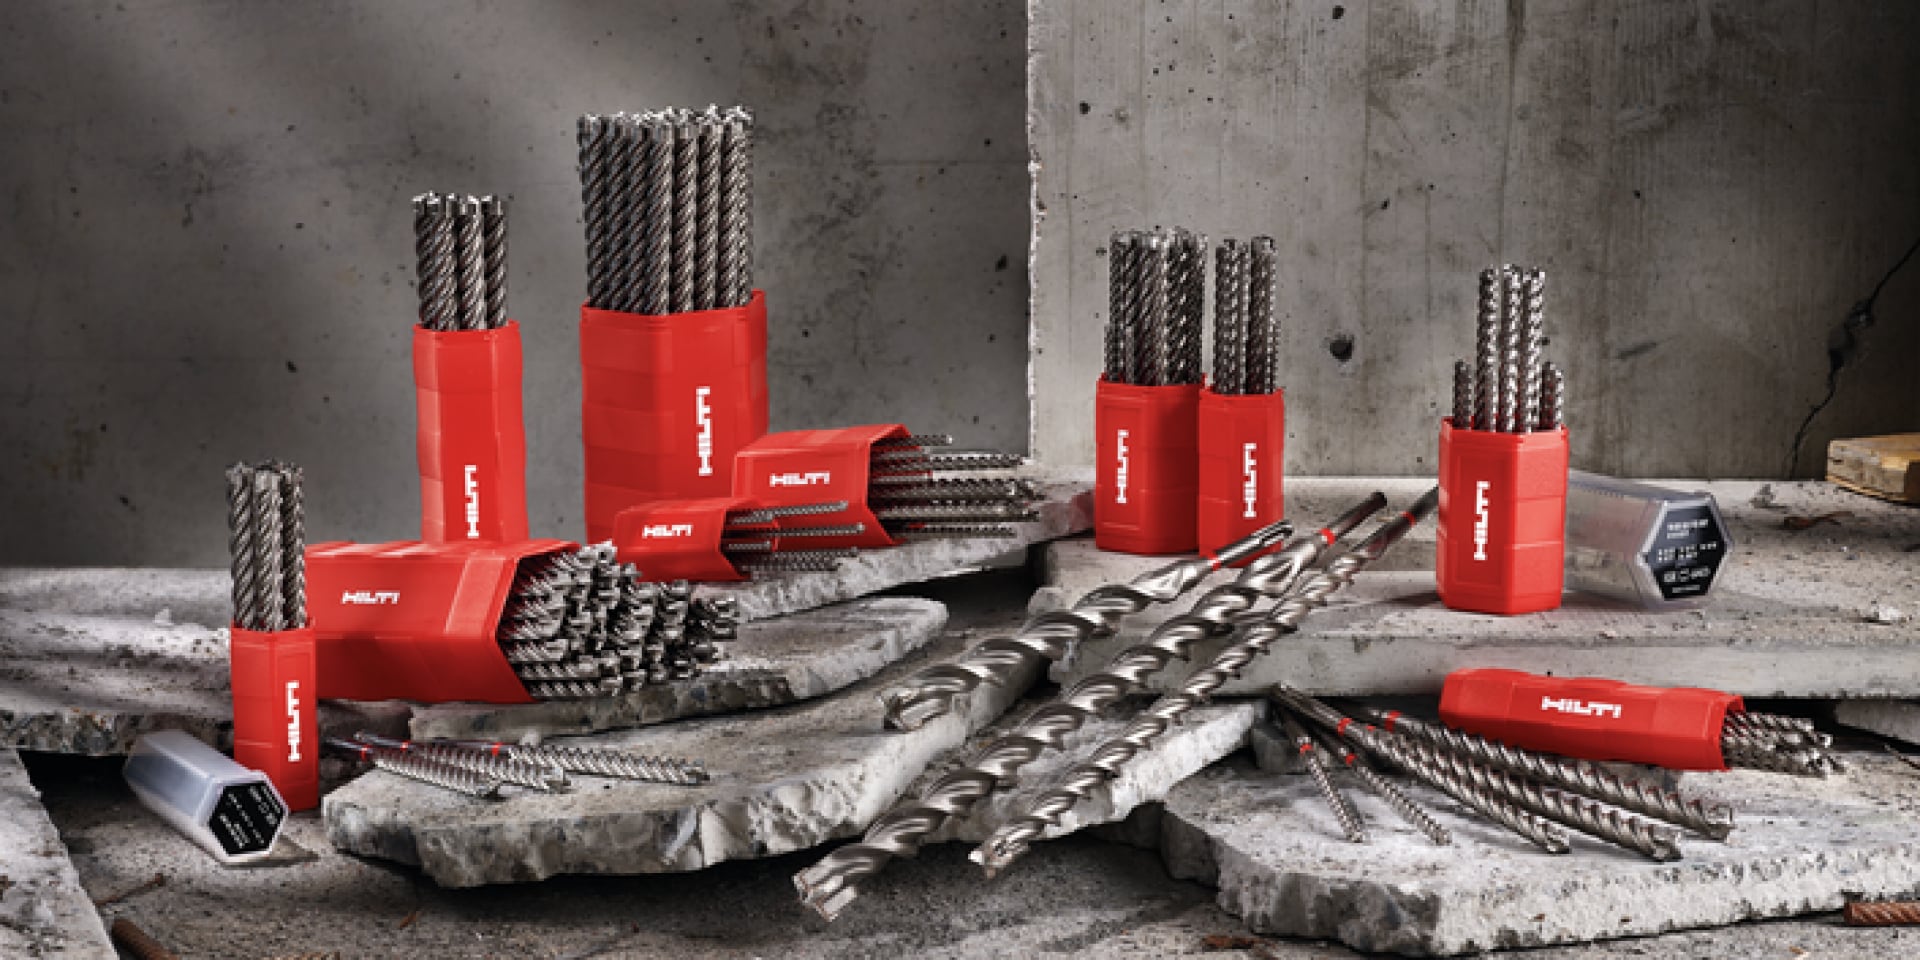 A collection of TE CX drill bits placed atop a mound of rubble